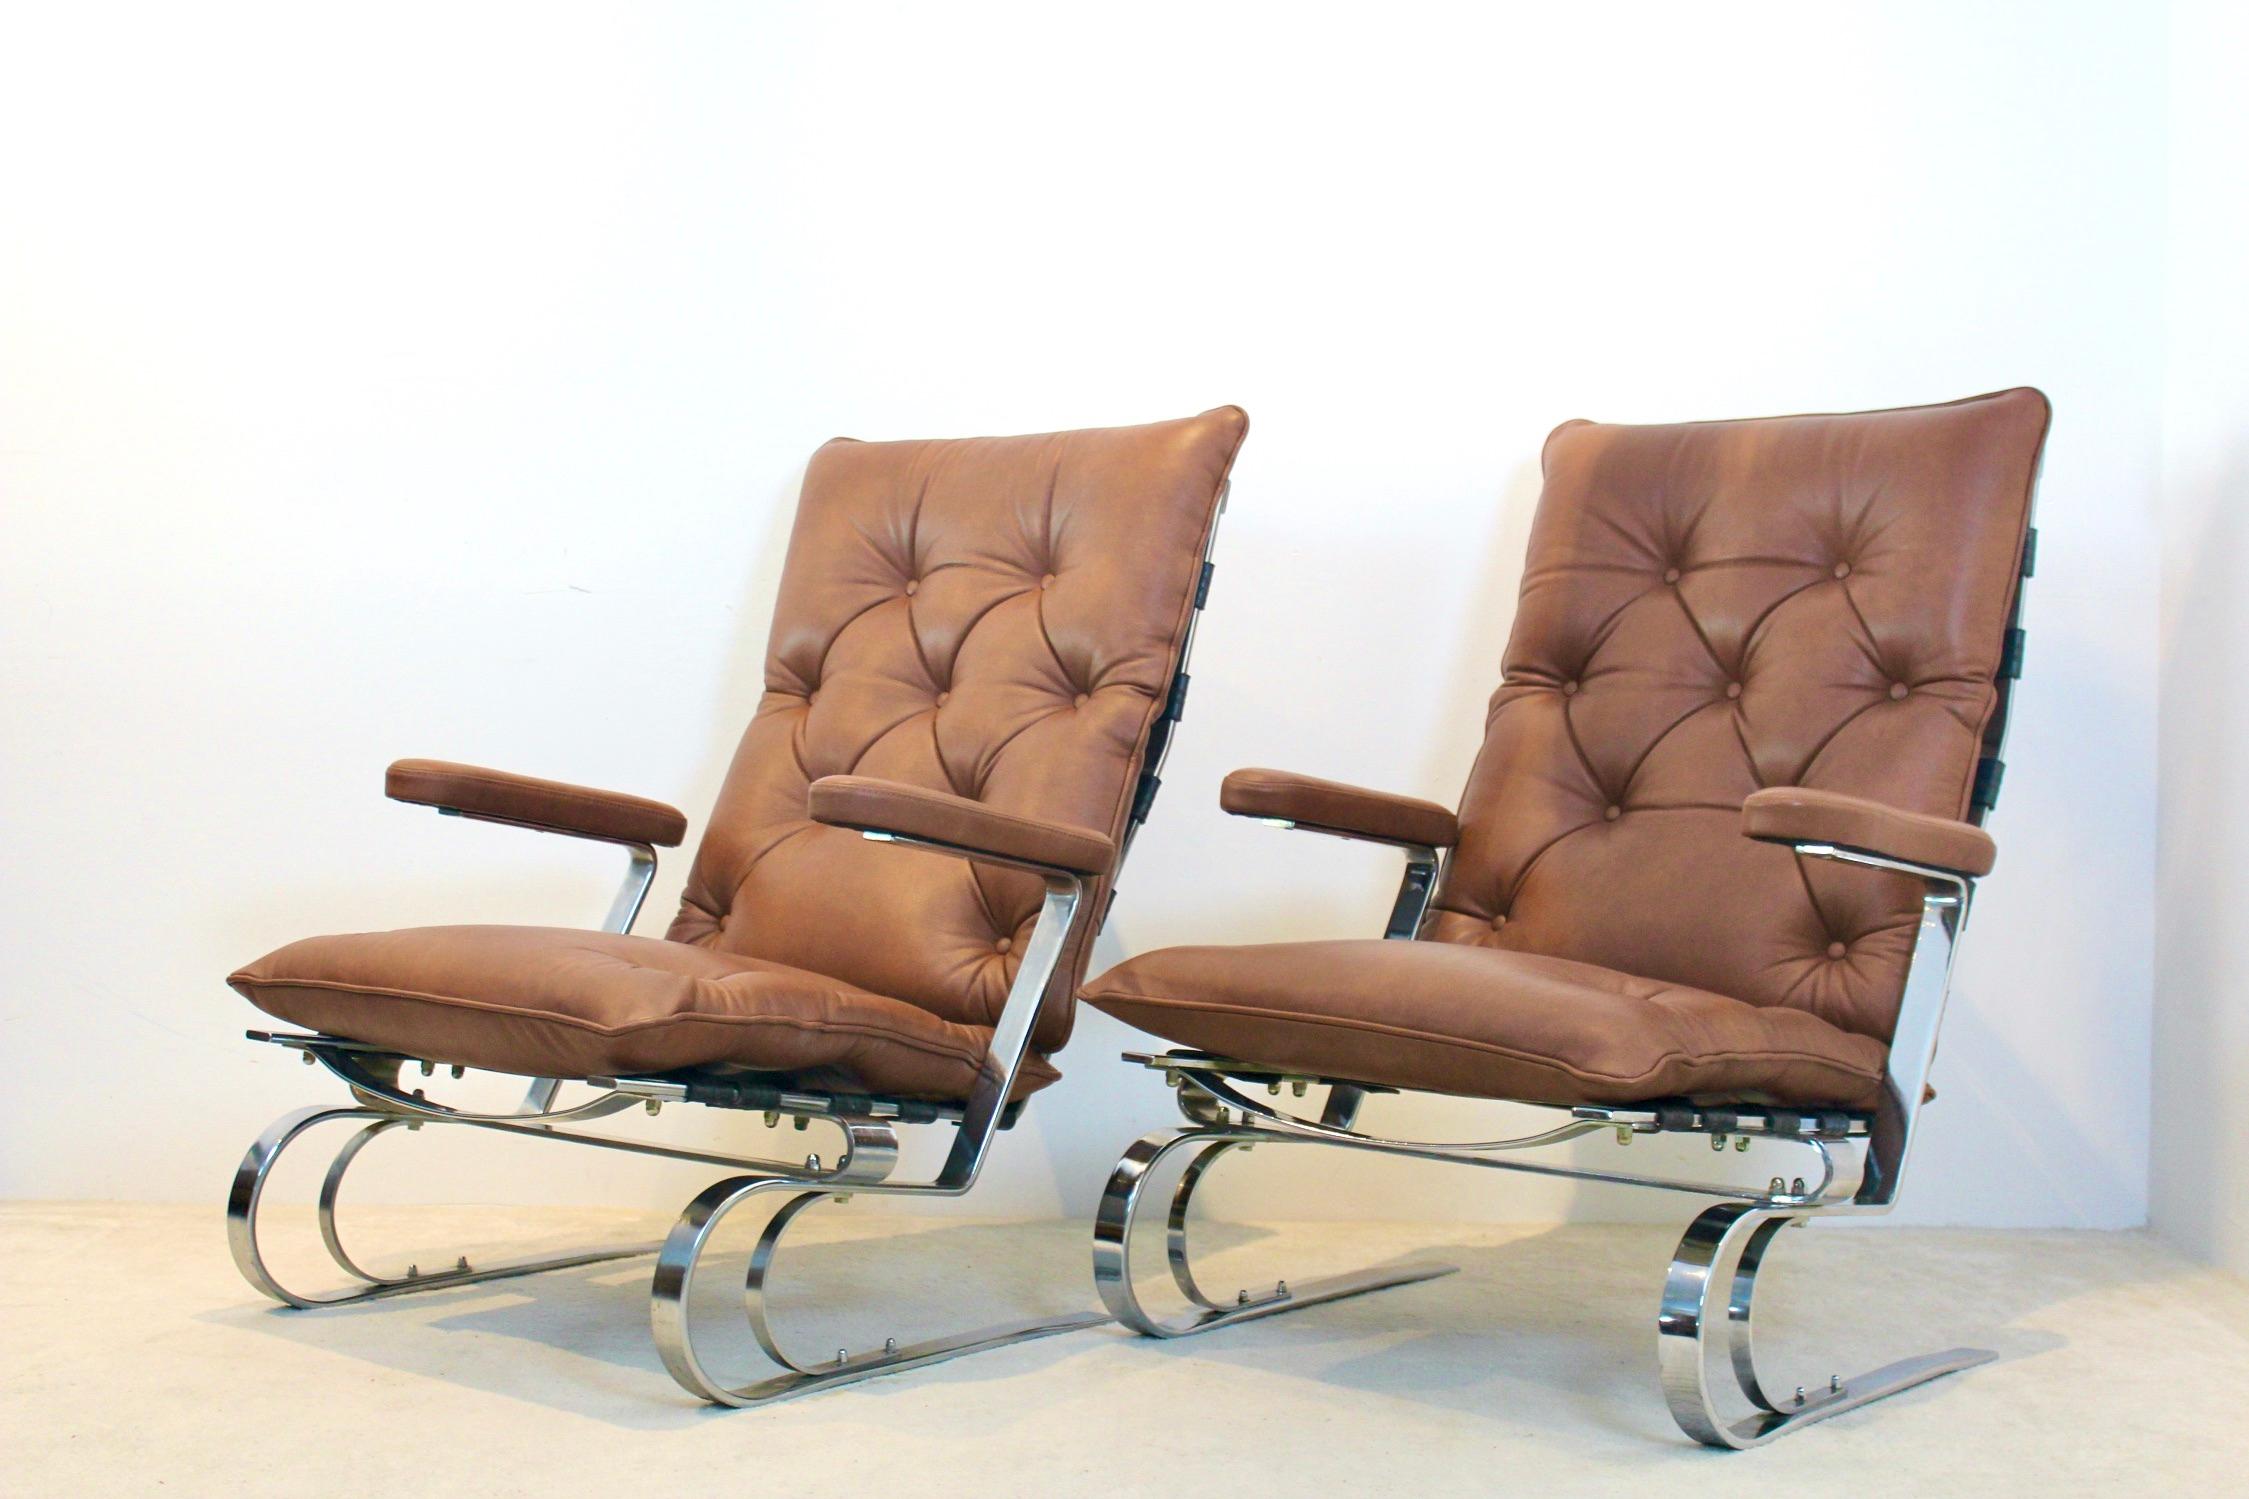 Very nice lounge chairs manufactured by COR, Germany. Extremely comfortable chairs with a solid steel chromed base, rubber straps for extra comfort and renewed high quality leather upholstery in cognac brown. Very good condition.